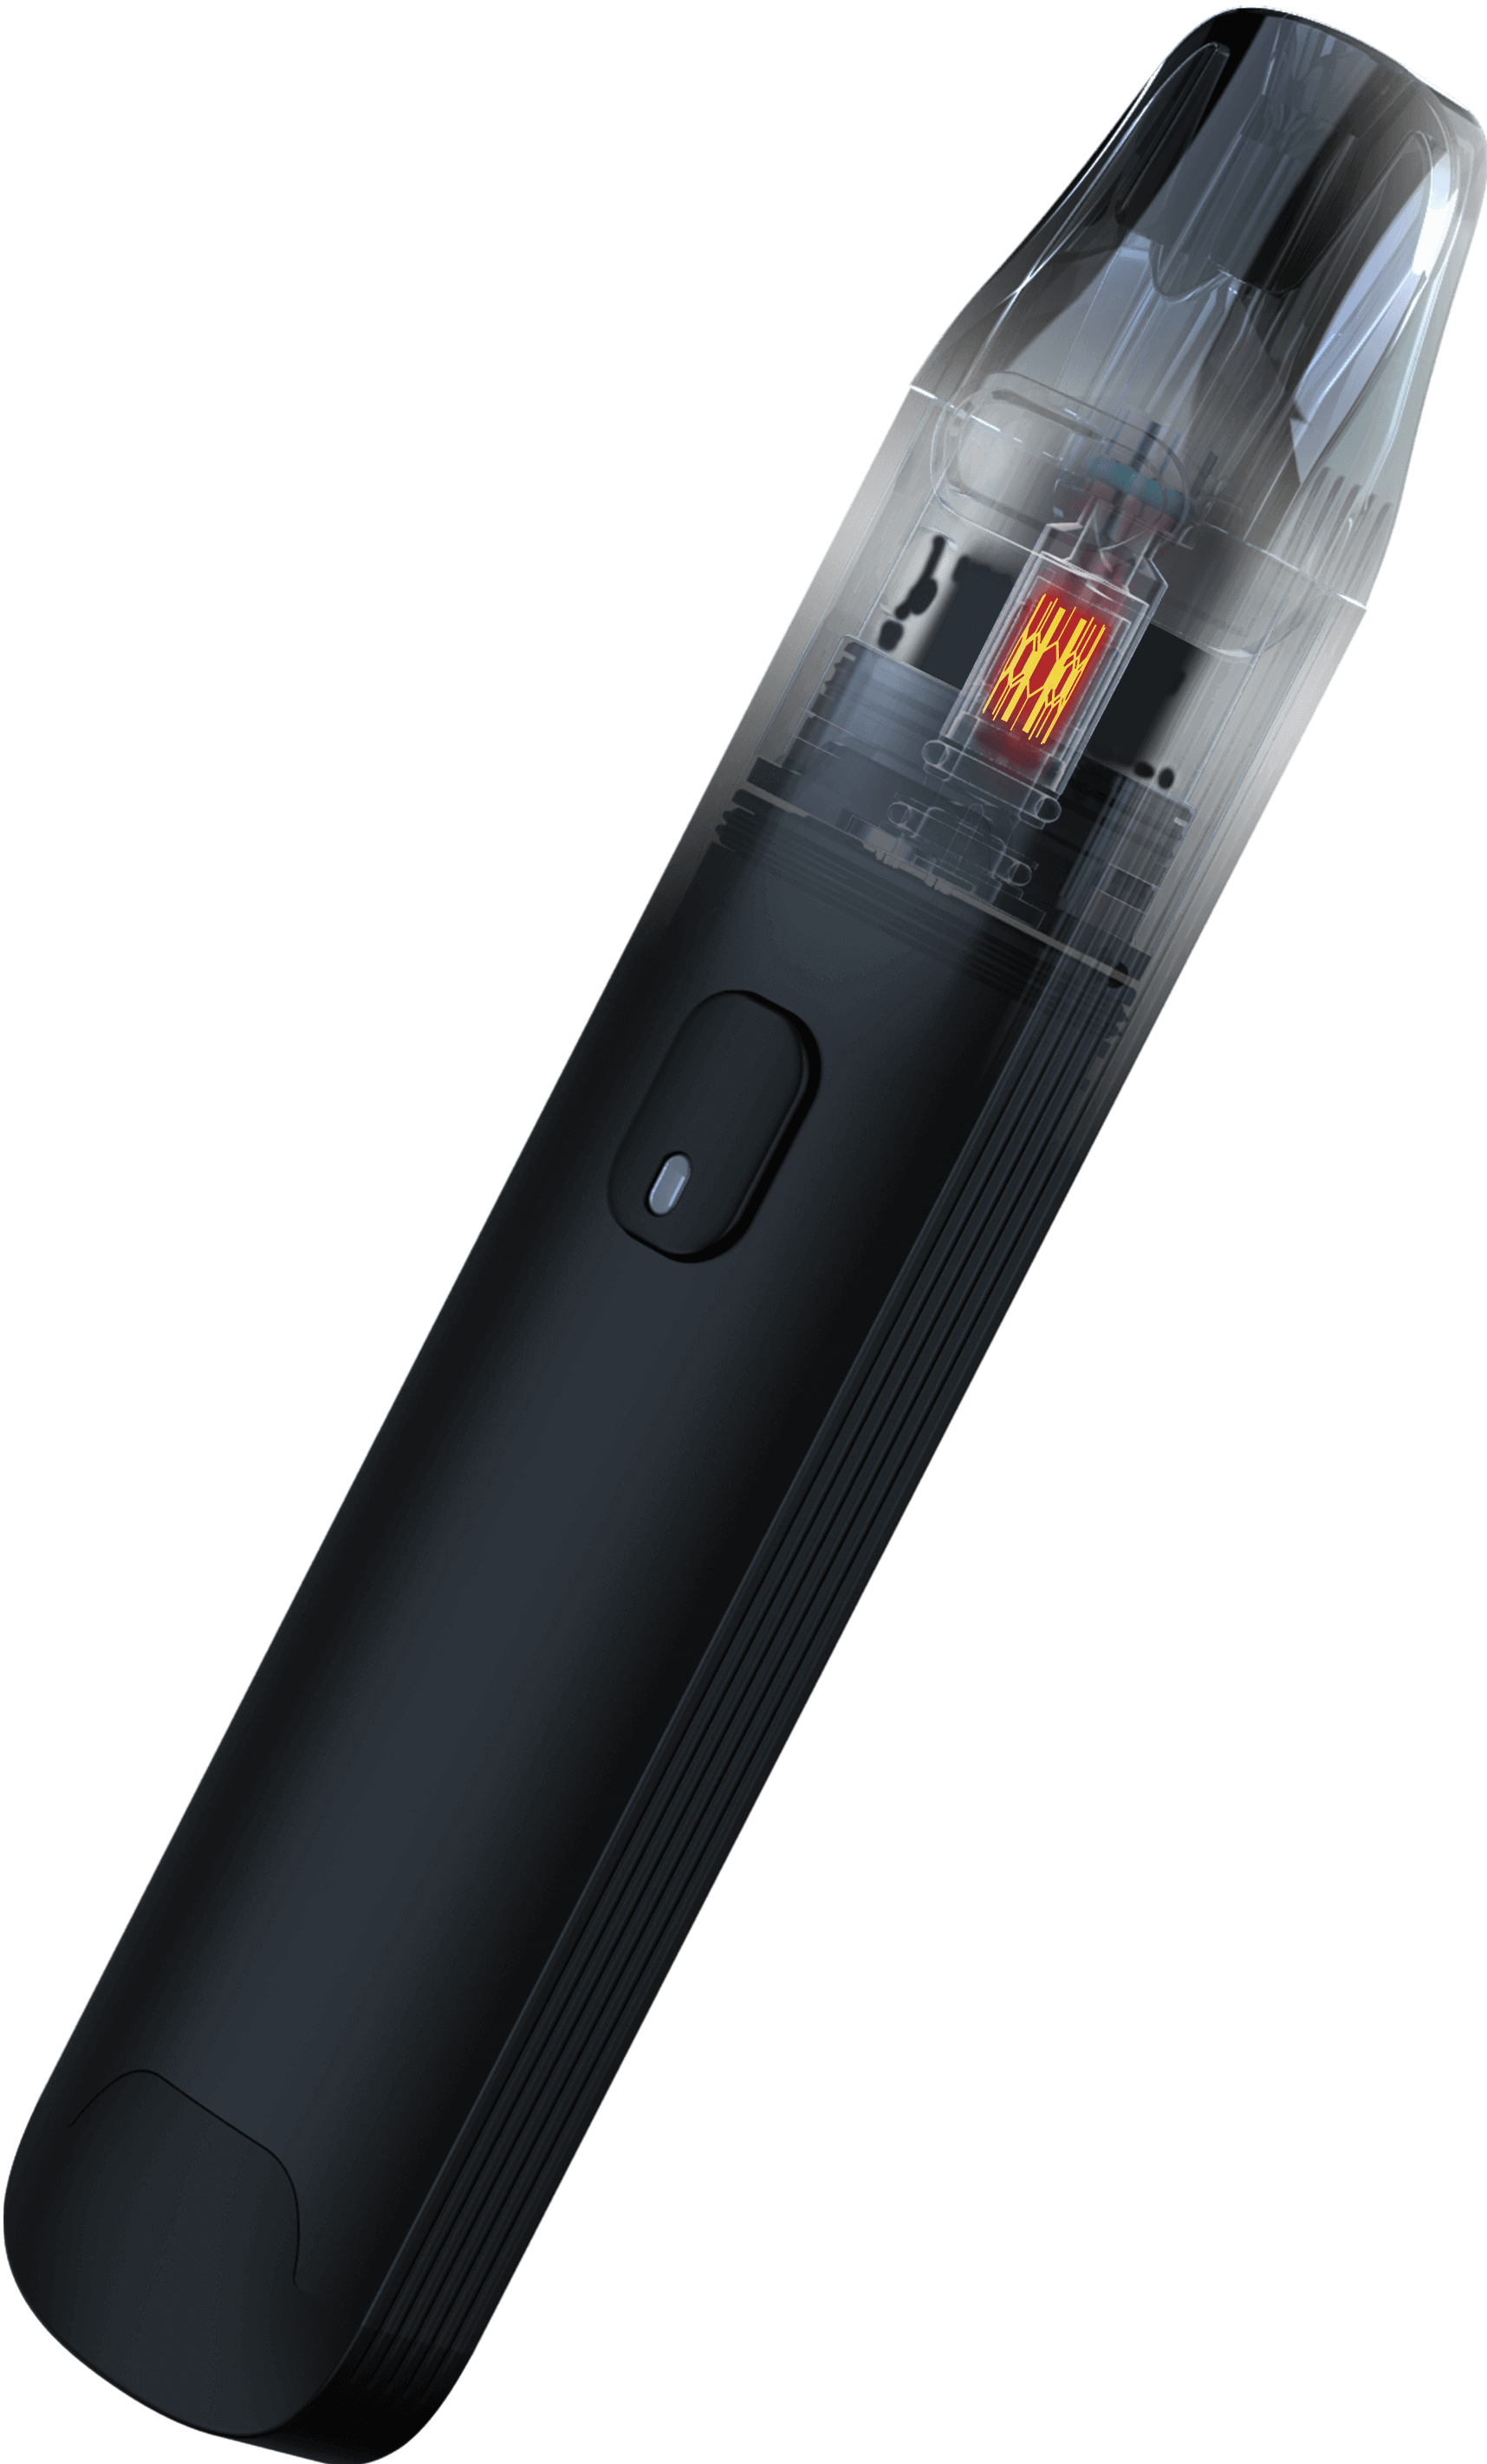 The Joyetech AST technology supports long life-span and greater flavor